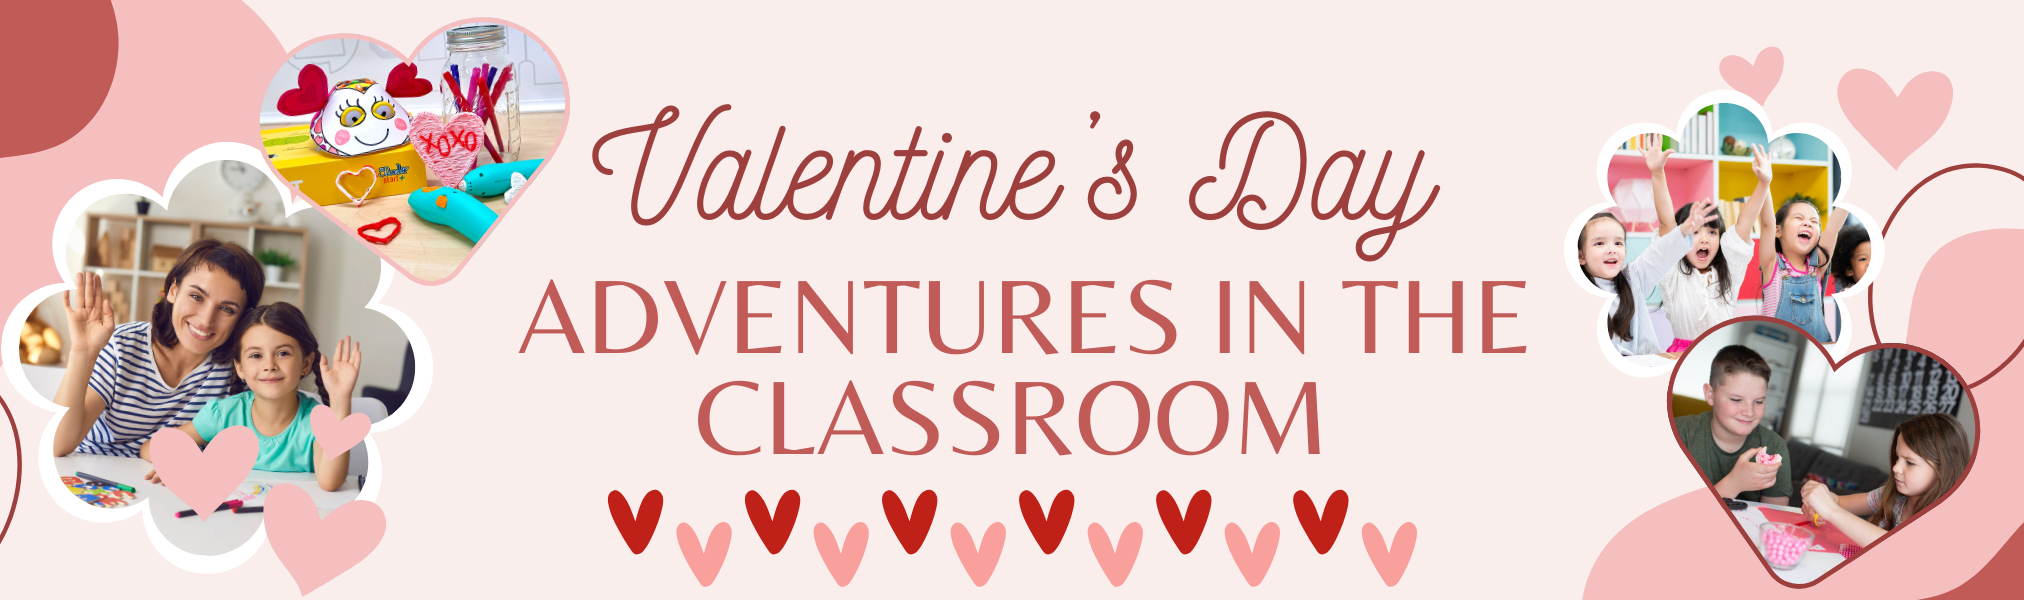 Valentine’s Day Adventures in the Classroom image